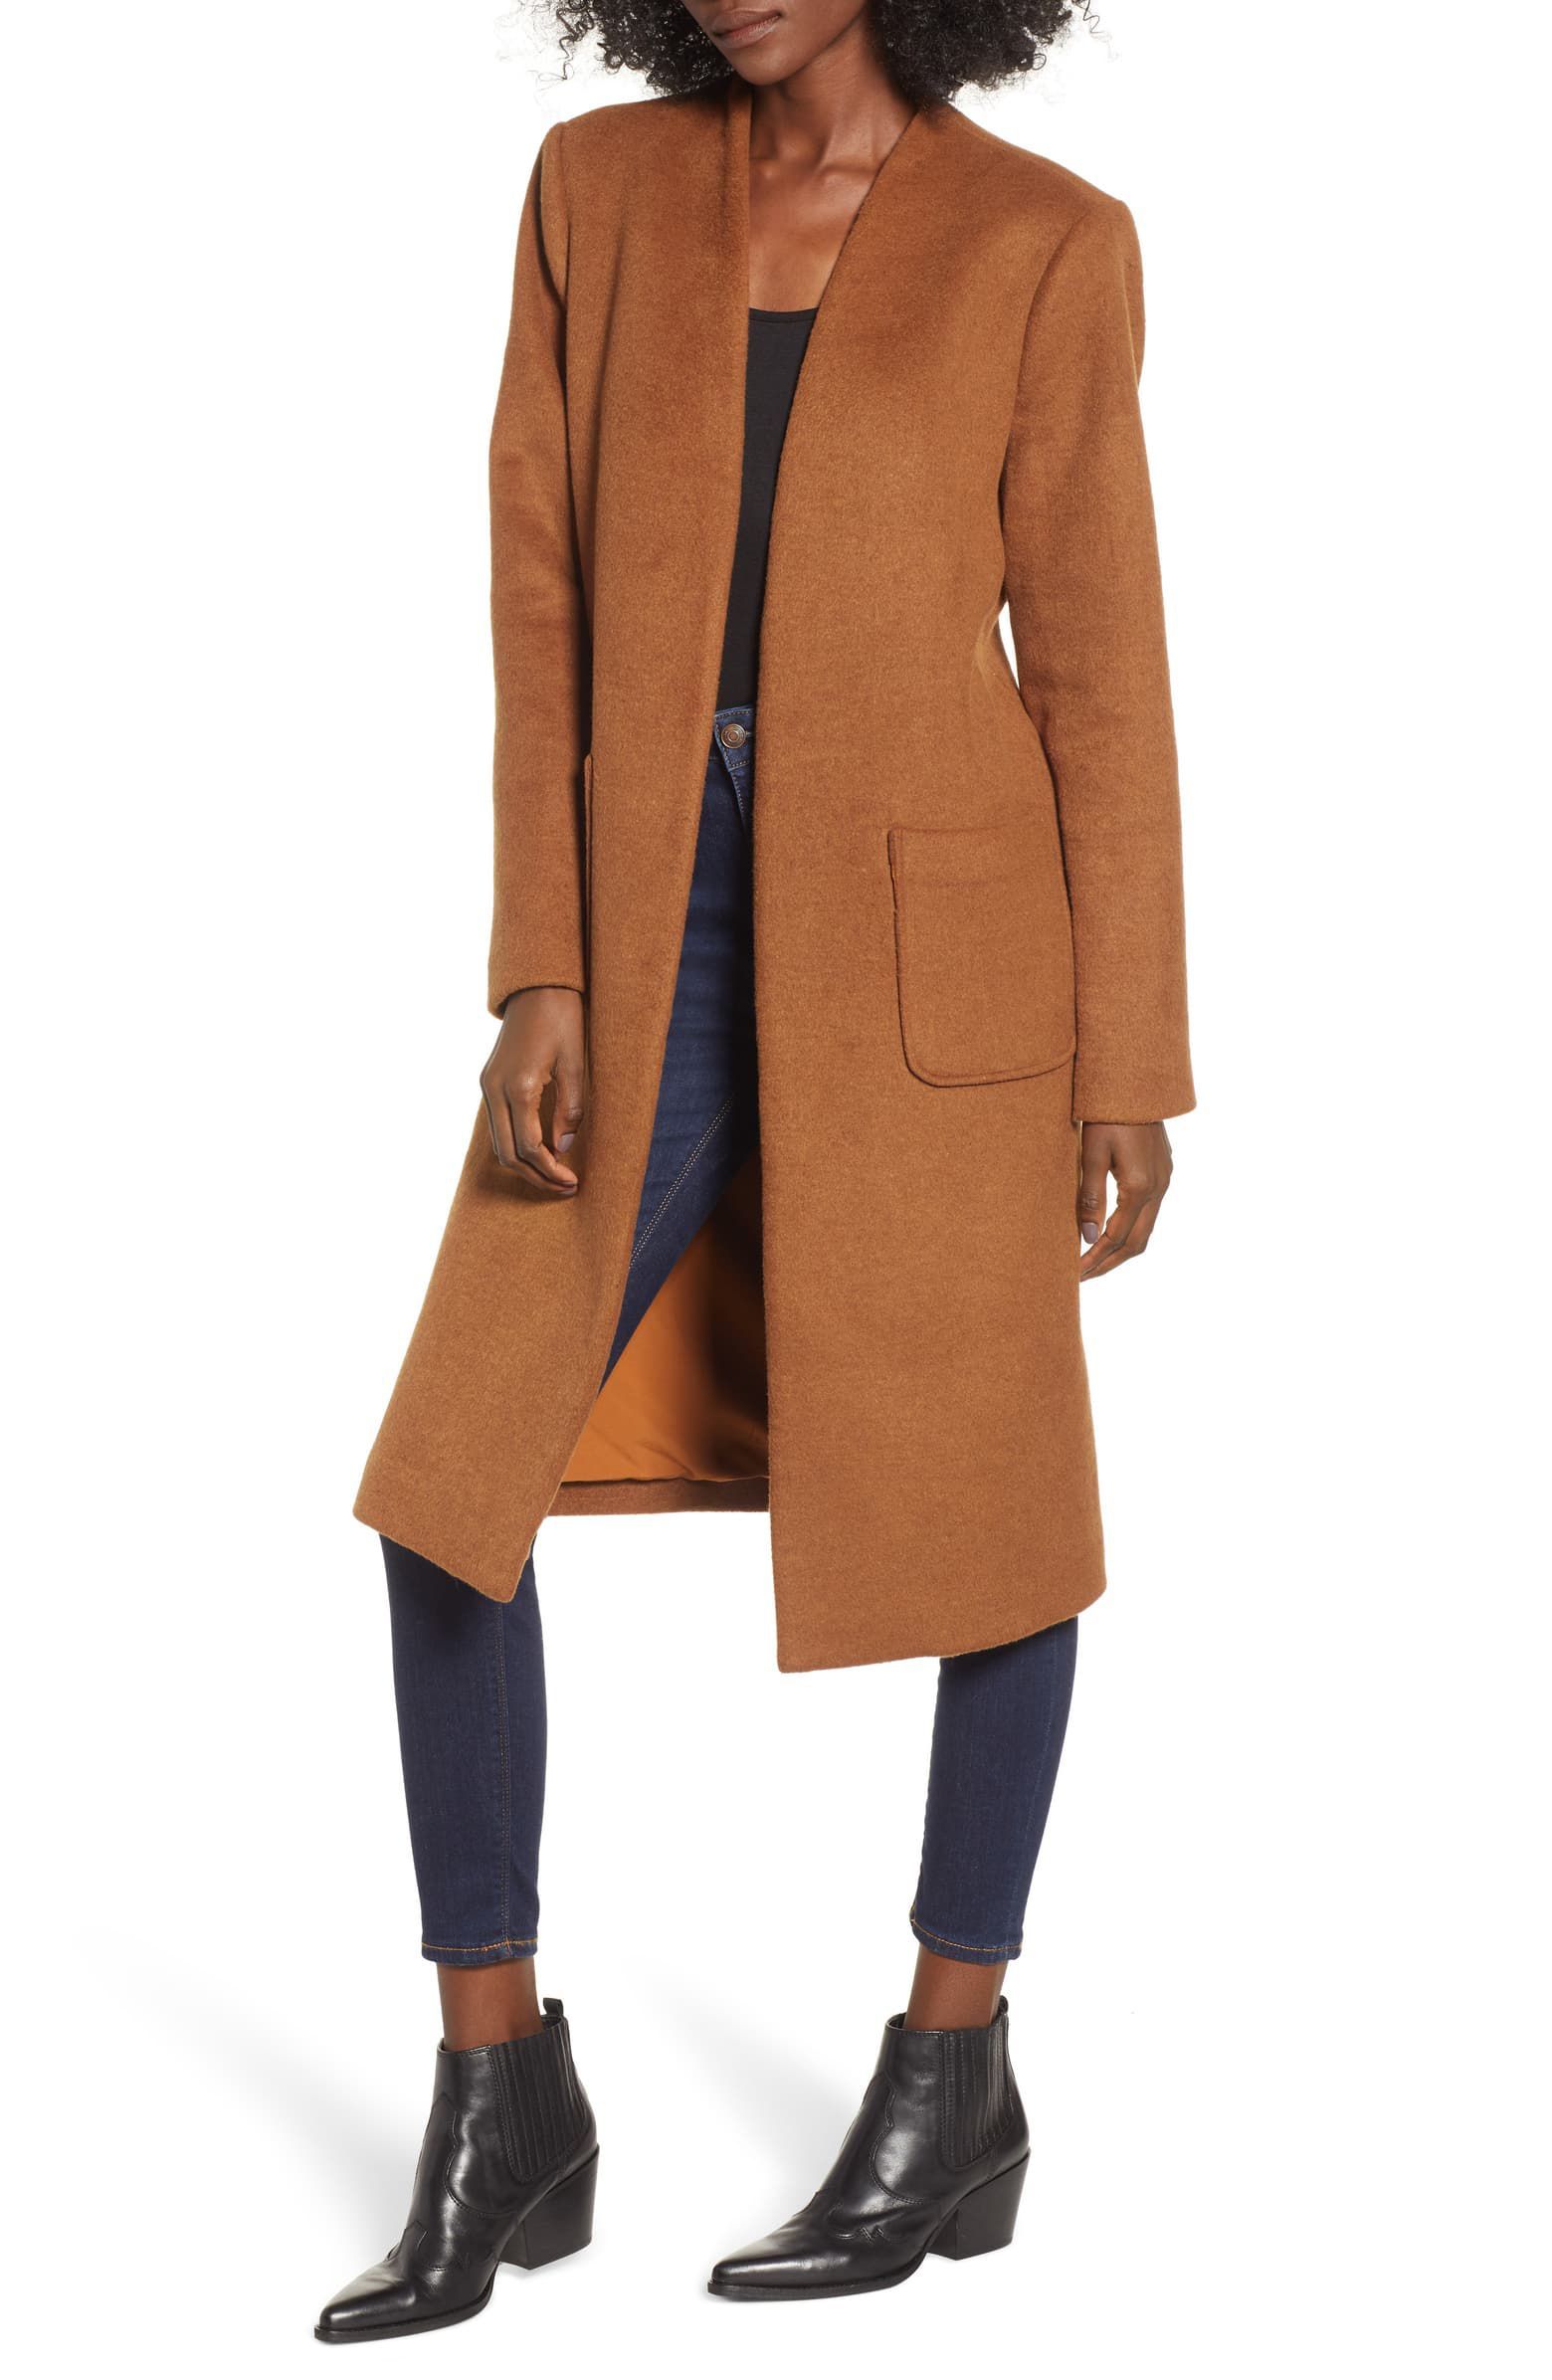 25 Best Camel Coats To Buy Top Classic And New Camel Coat Styles